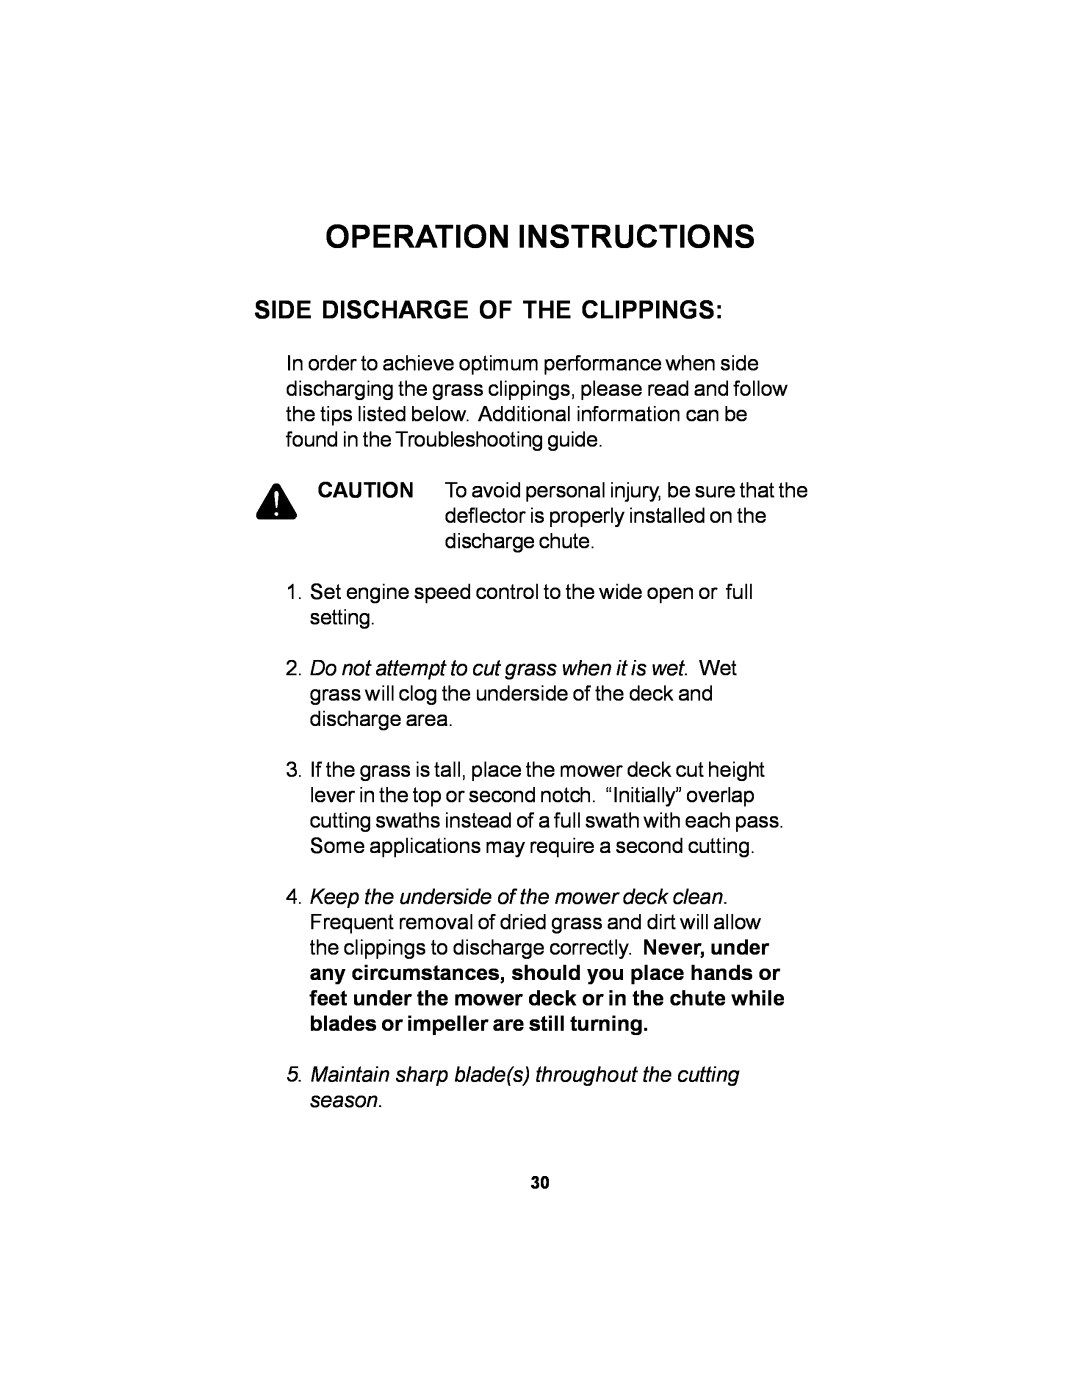 Dixon 12881-106 manual Side Discharge Of The Clippings, Operation Instructions 